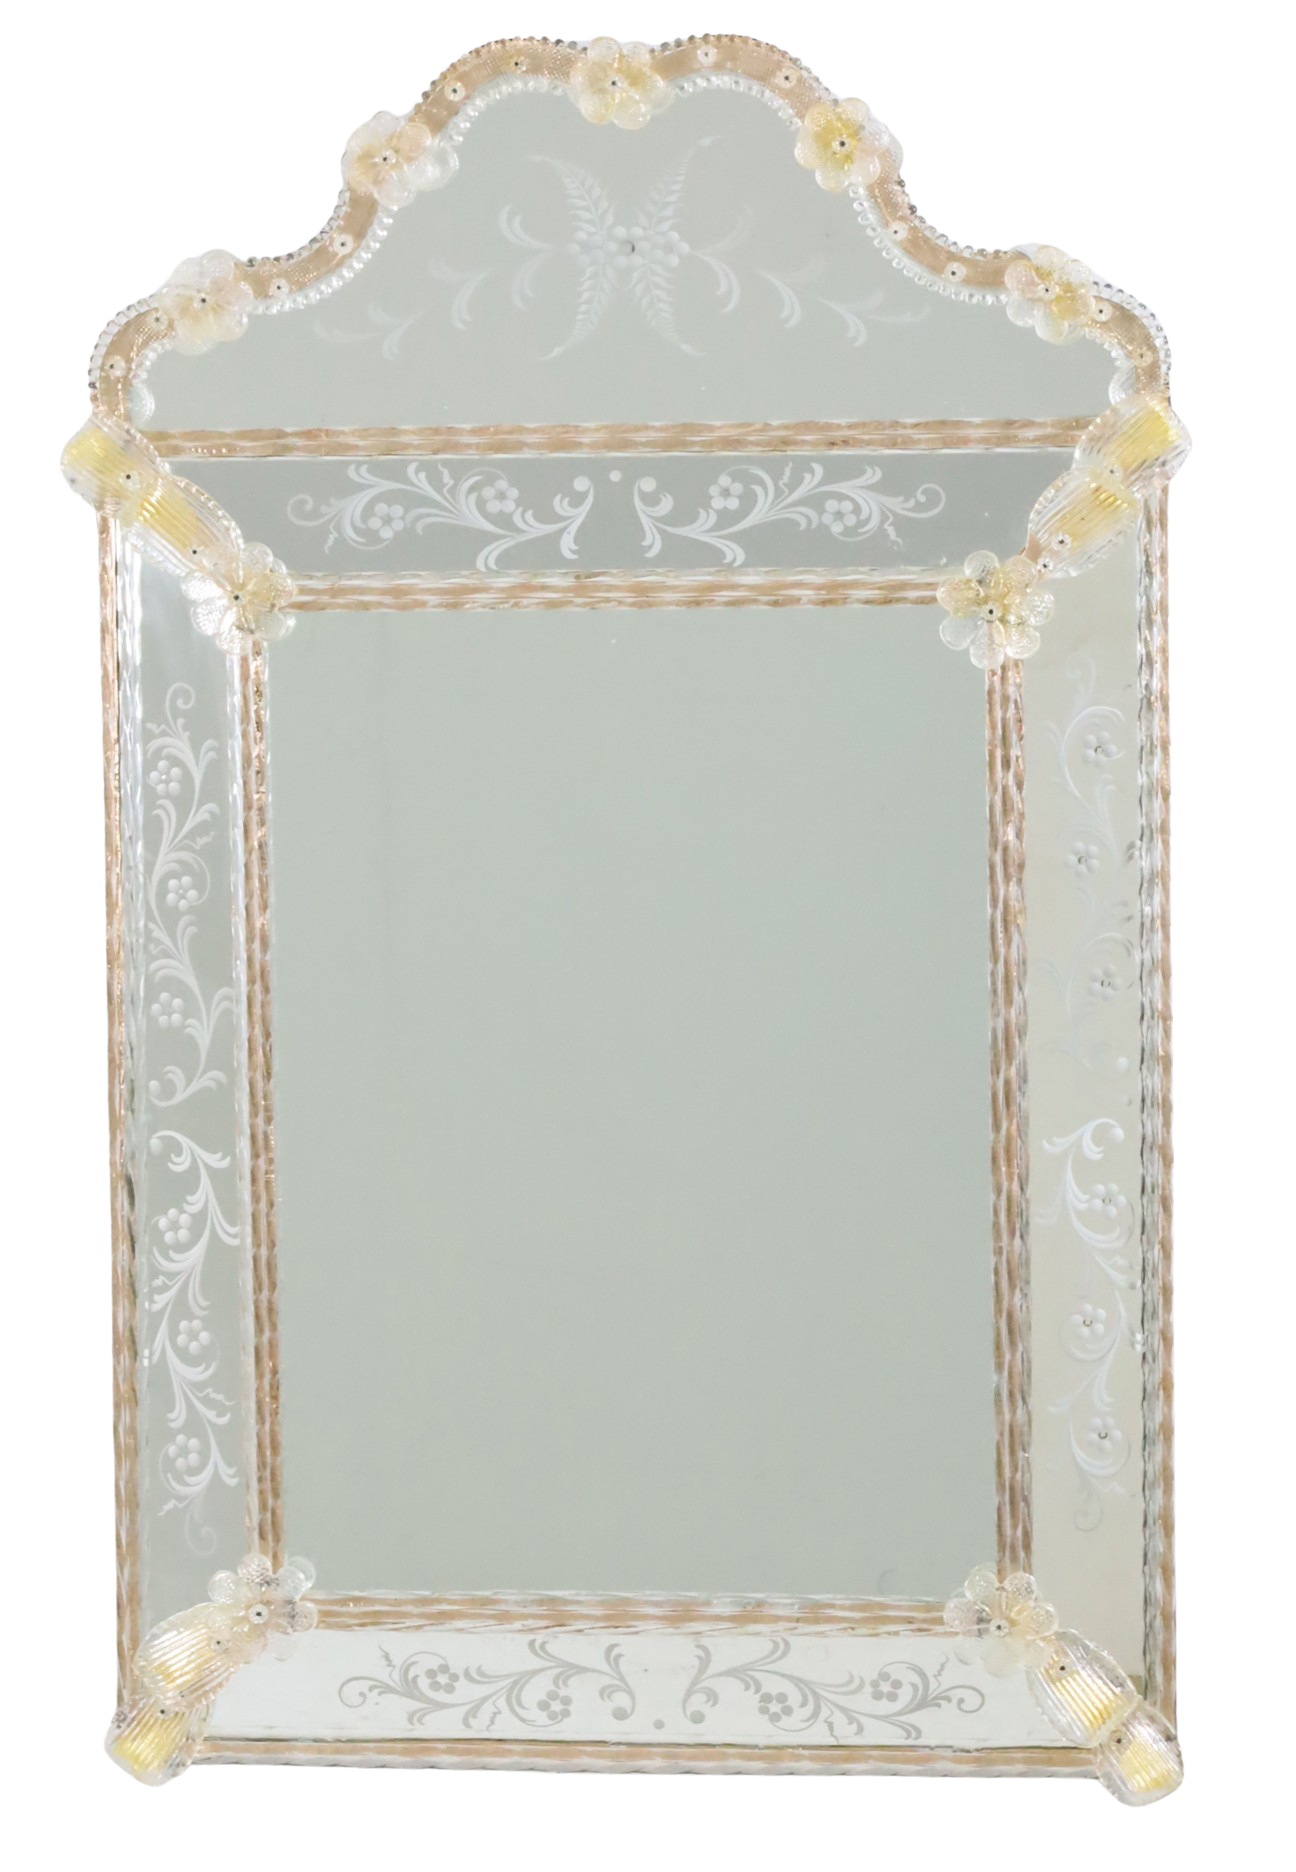 VENETIAN ETCHED AND APPLIED GLASS